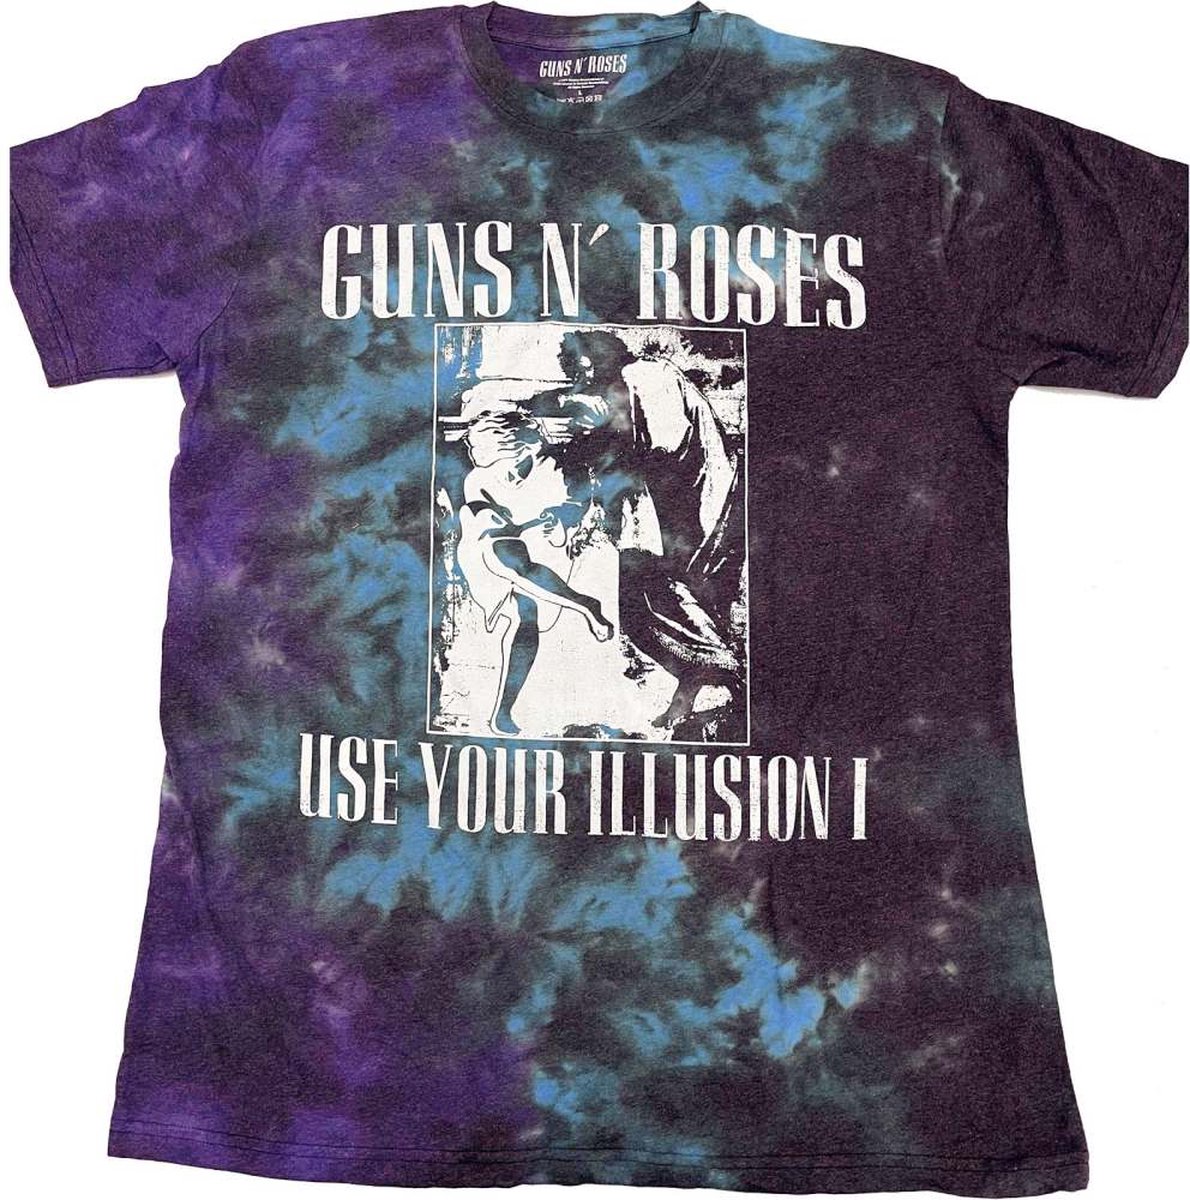 Guns N' Roses - Use Your Illusion Monochrome Heren T-shirt - M - Blauw/Paars